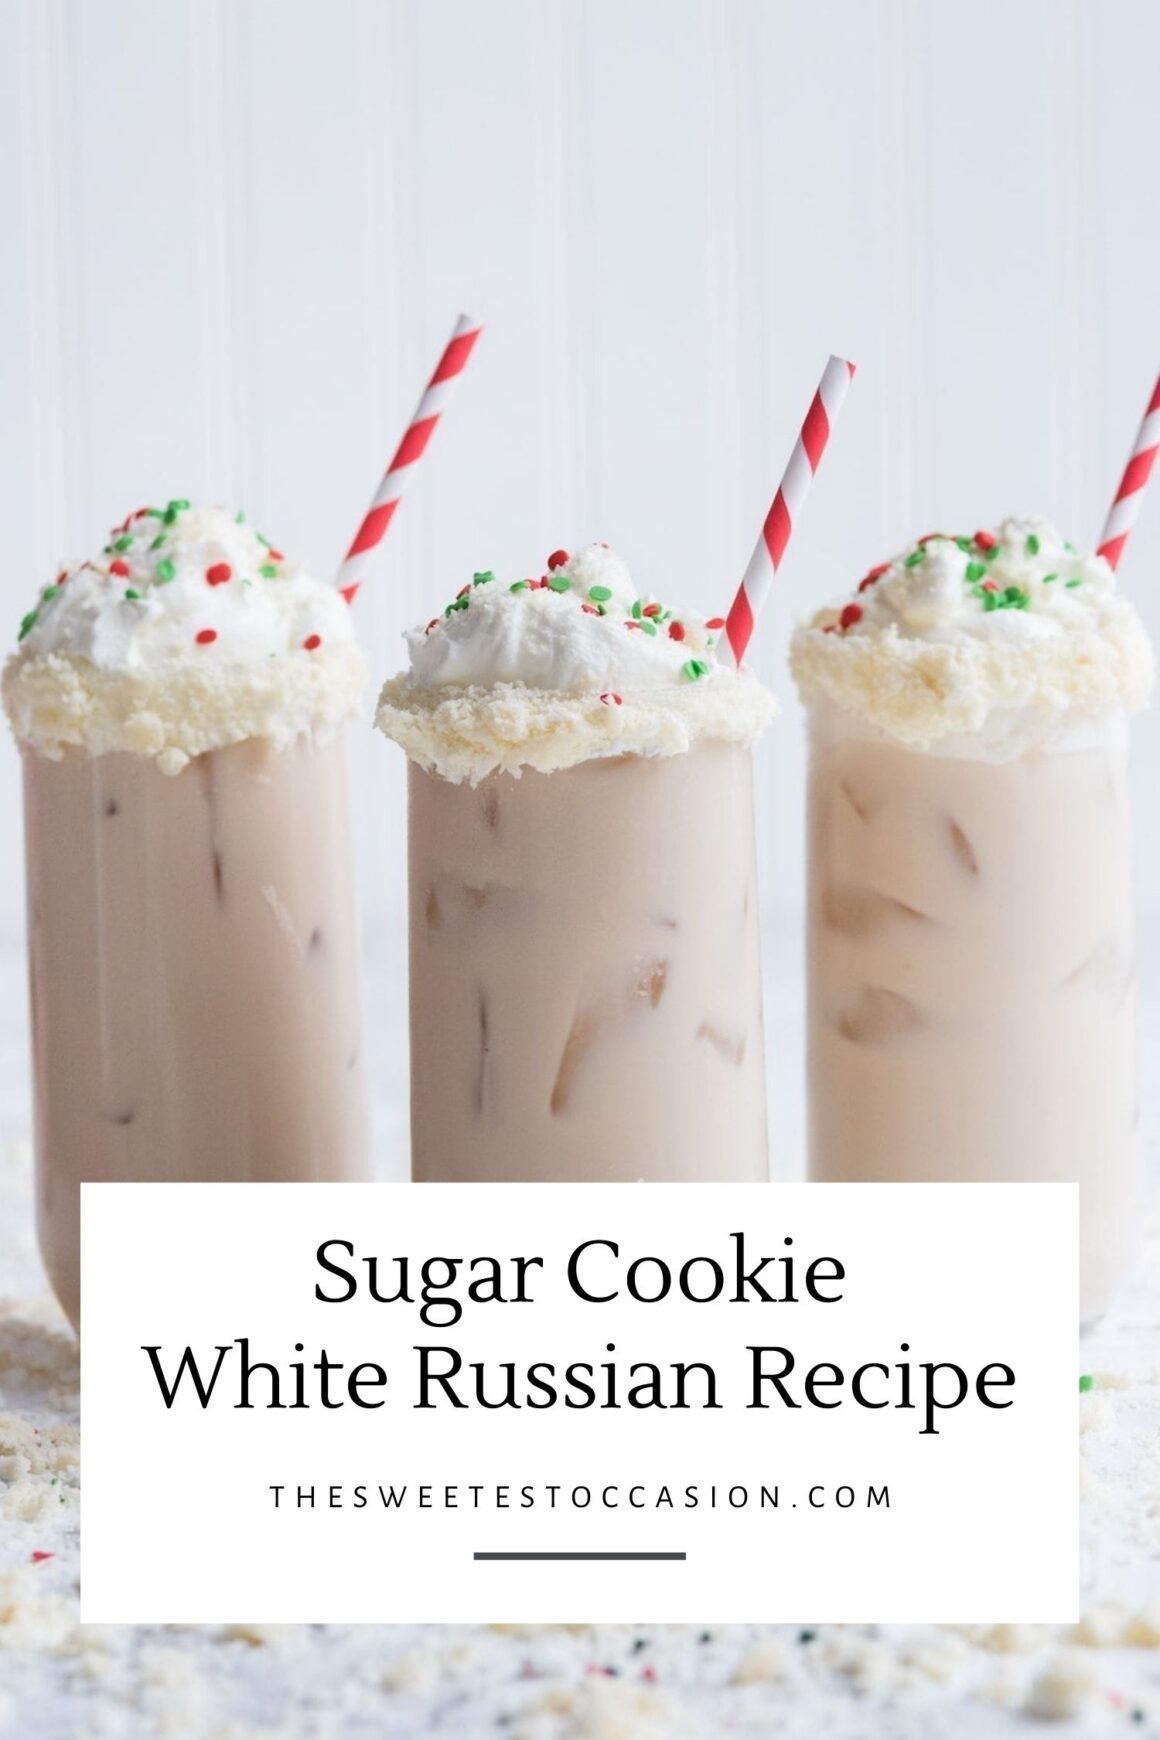 White Russian cocktail white whipped cream and sprinkles in a glass with a red and white striped straw